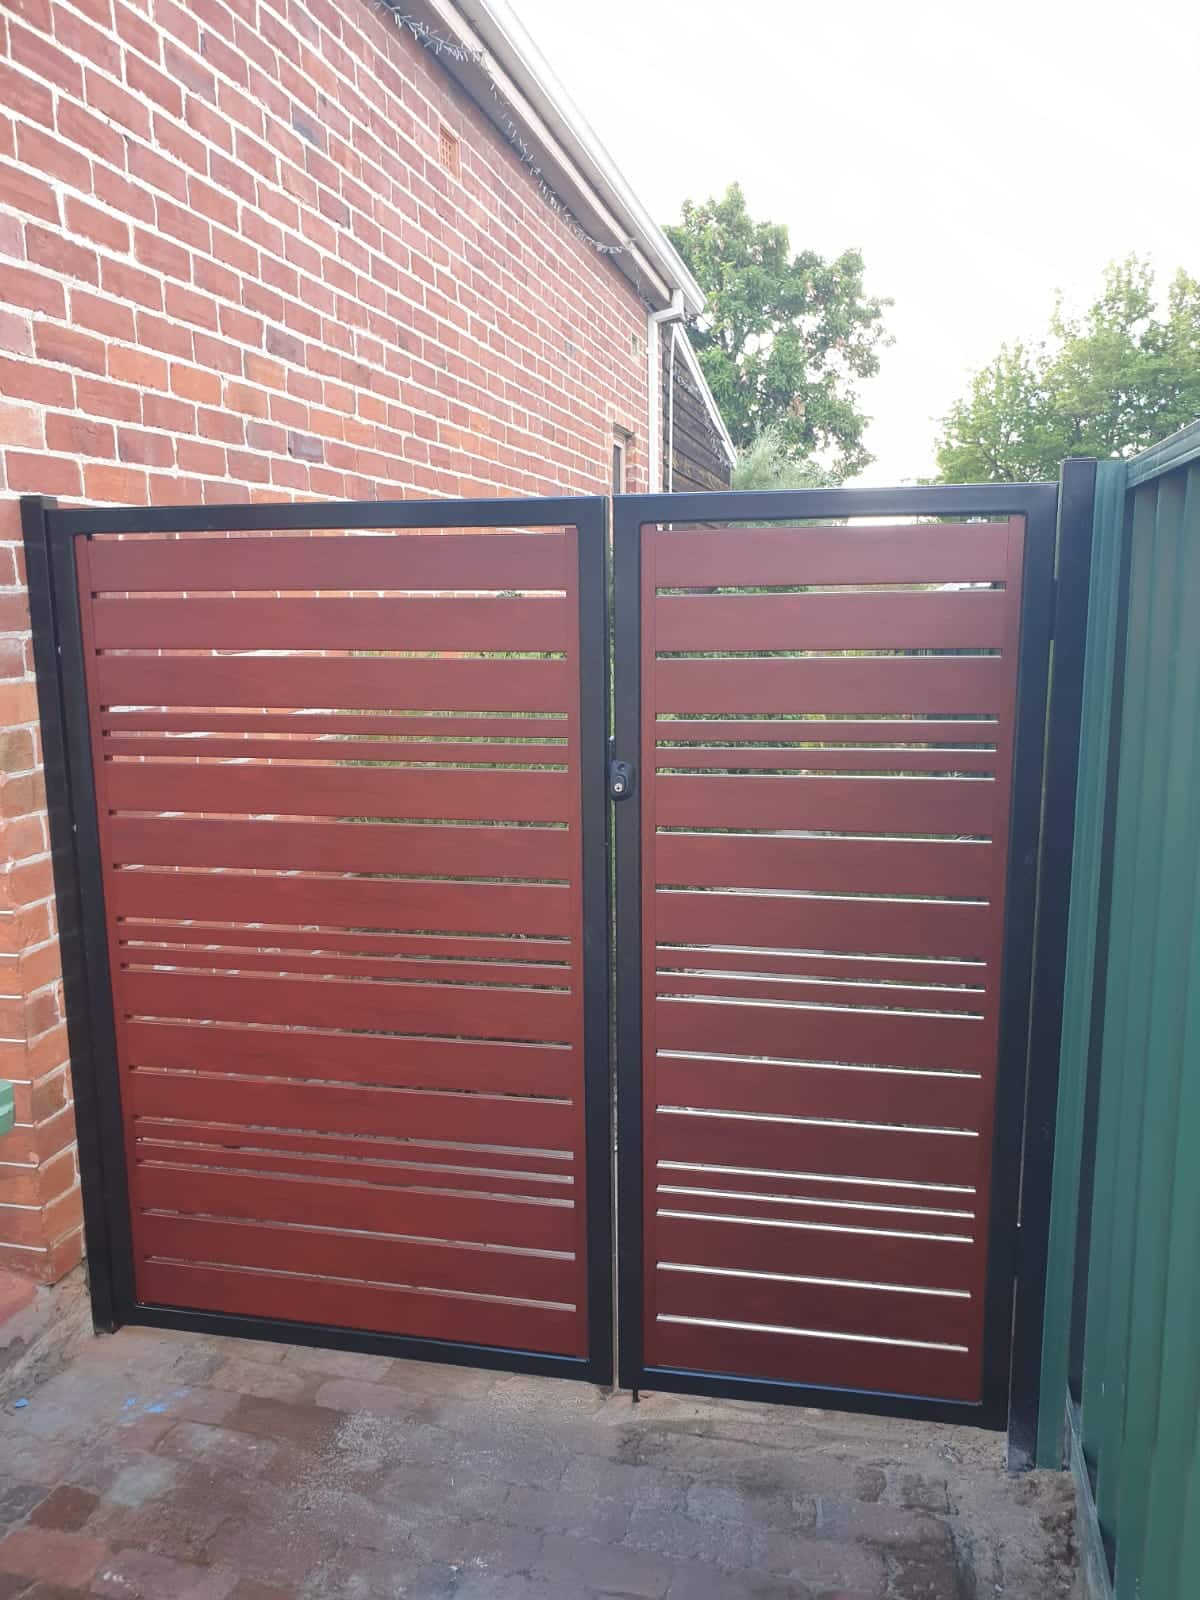 A red slat gate installed for a property in Perth, providing a secure and stylish entrance. The gate features evenly spaced horizontal slats made of durable materials such as aluminum, and is powder-coated in a bold red color that adds a touch of personality to the property. The gate can be customized to fit any size or shape of the entrance, and is designed to provide both privacy and visibility. With its low maintenance and long-lasting durability, a slat red gate is a popular choice for residential and commercial properties in Perth